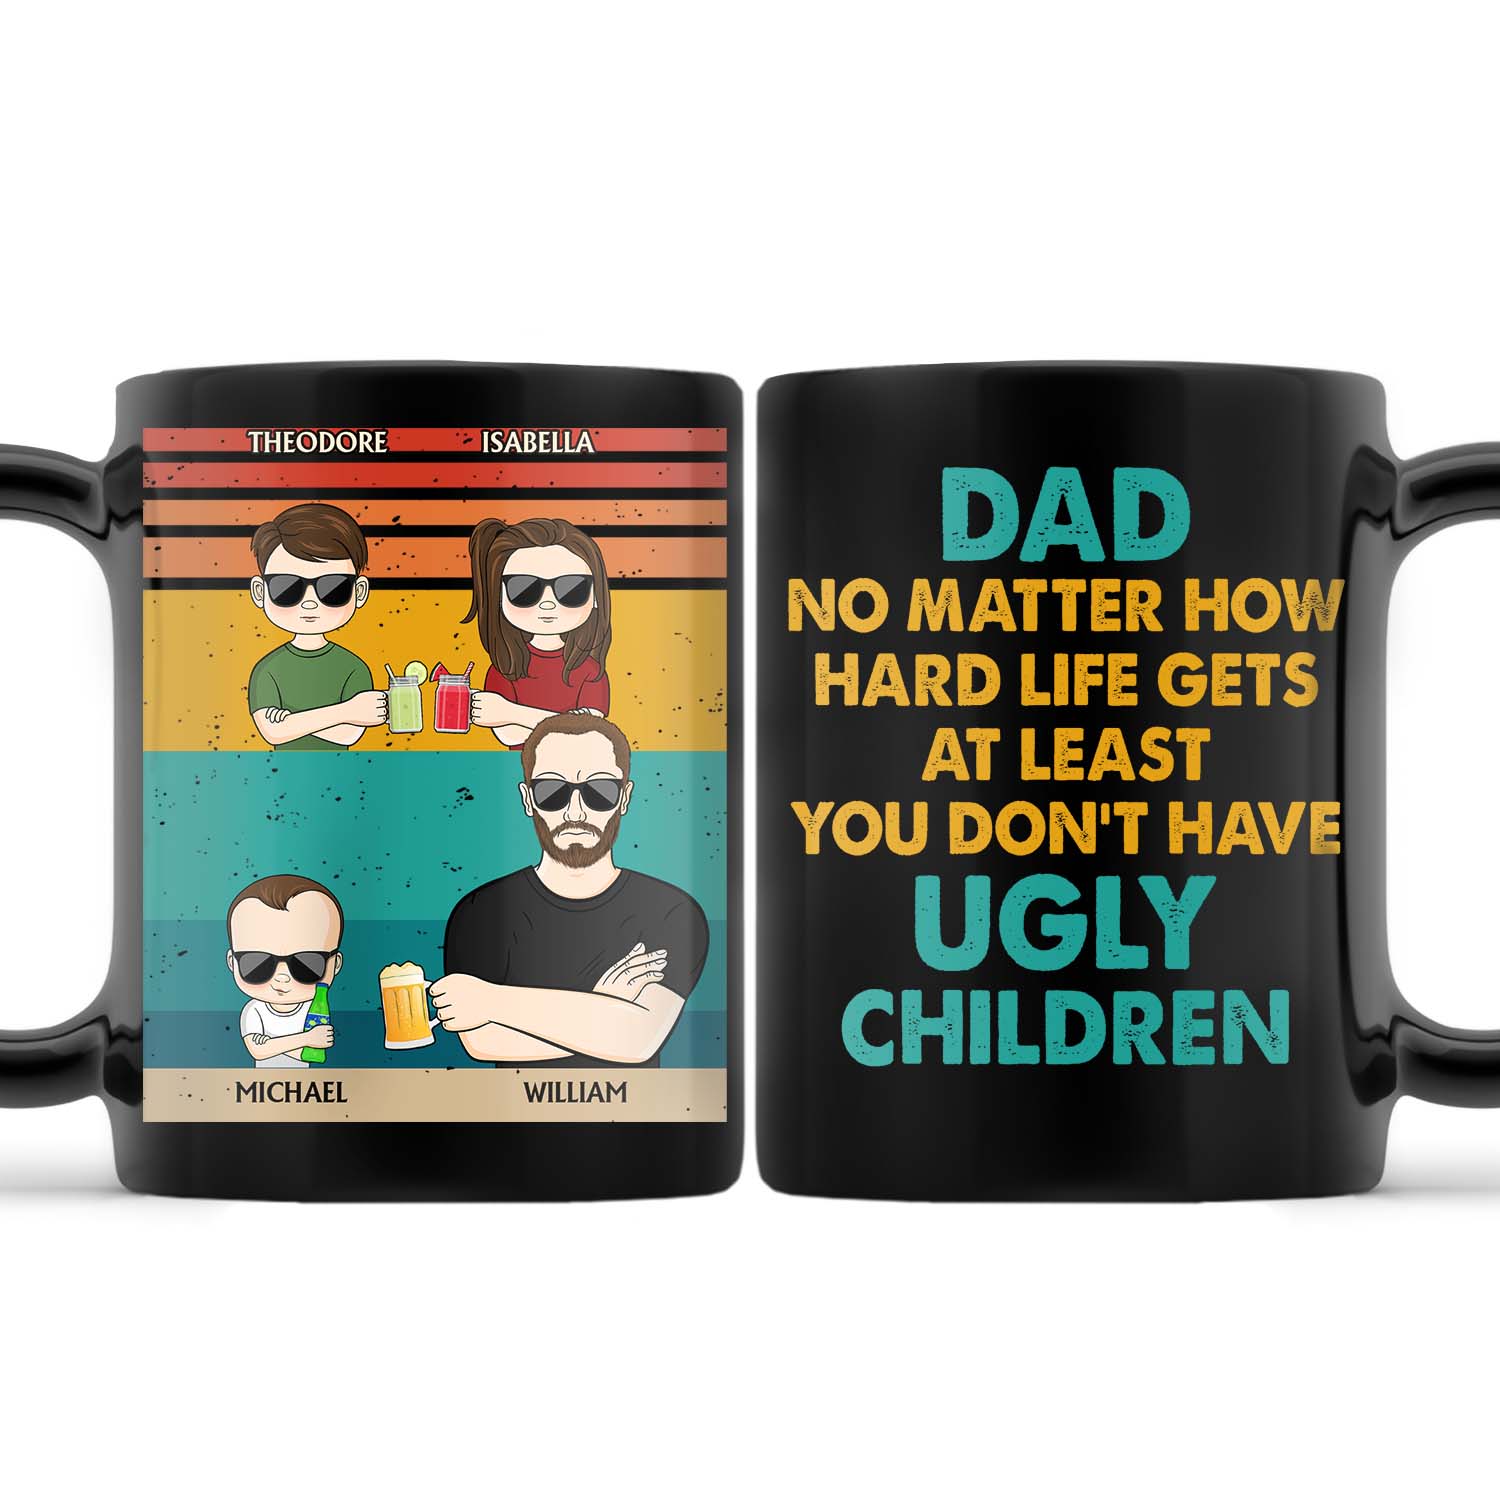 Dad No Matter How Hard Life Get At Least You Don't Have Ugly Children - Funny, Birthday Gift For Father, Husband - Personalized Custom Black Mug